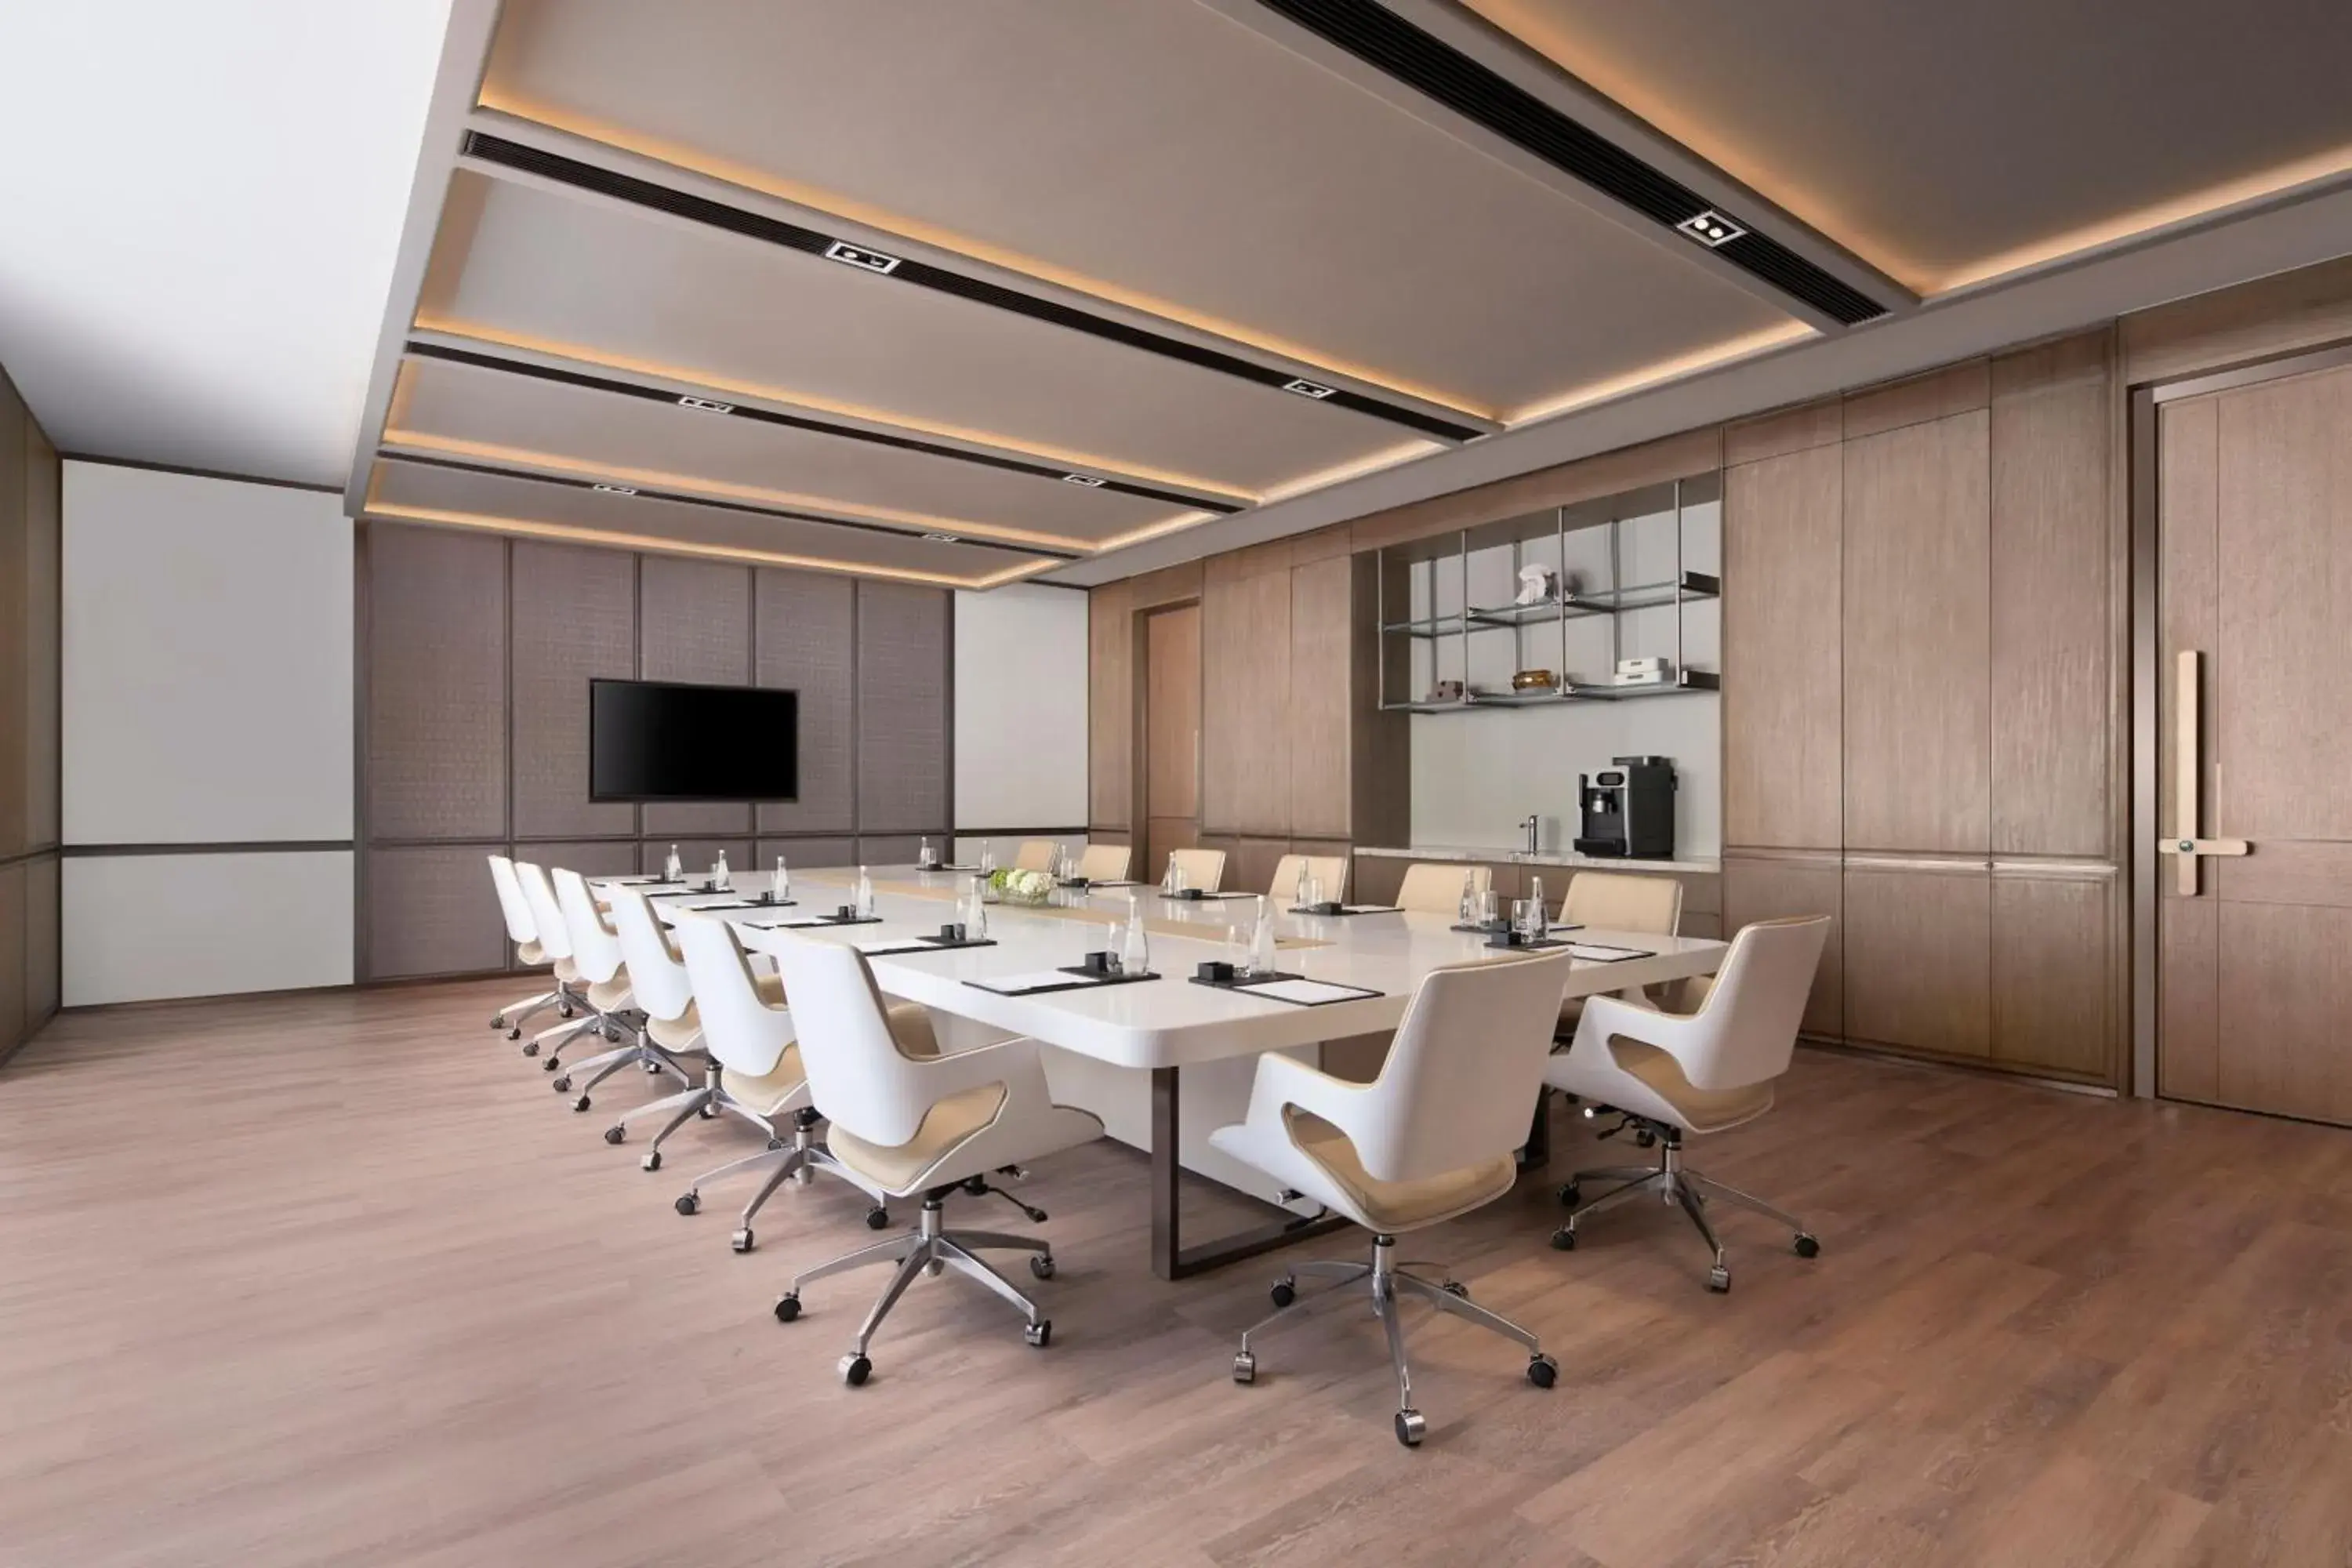 Meeting/conference room in Tianjin Marriott Hotel National Convention and Exhibition Center